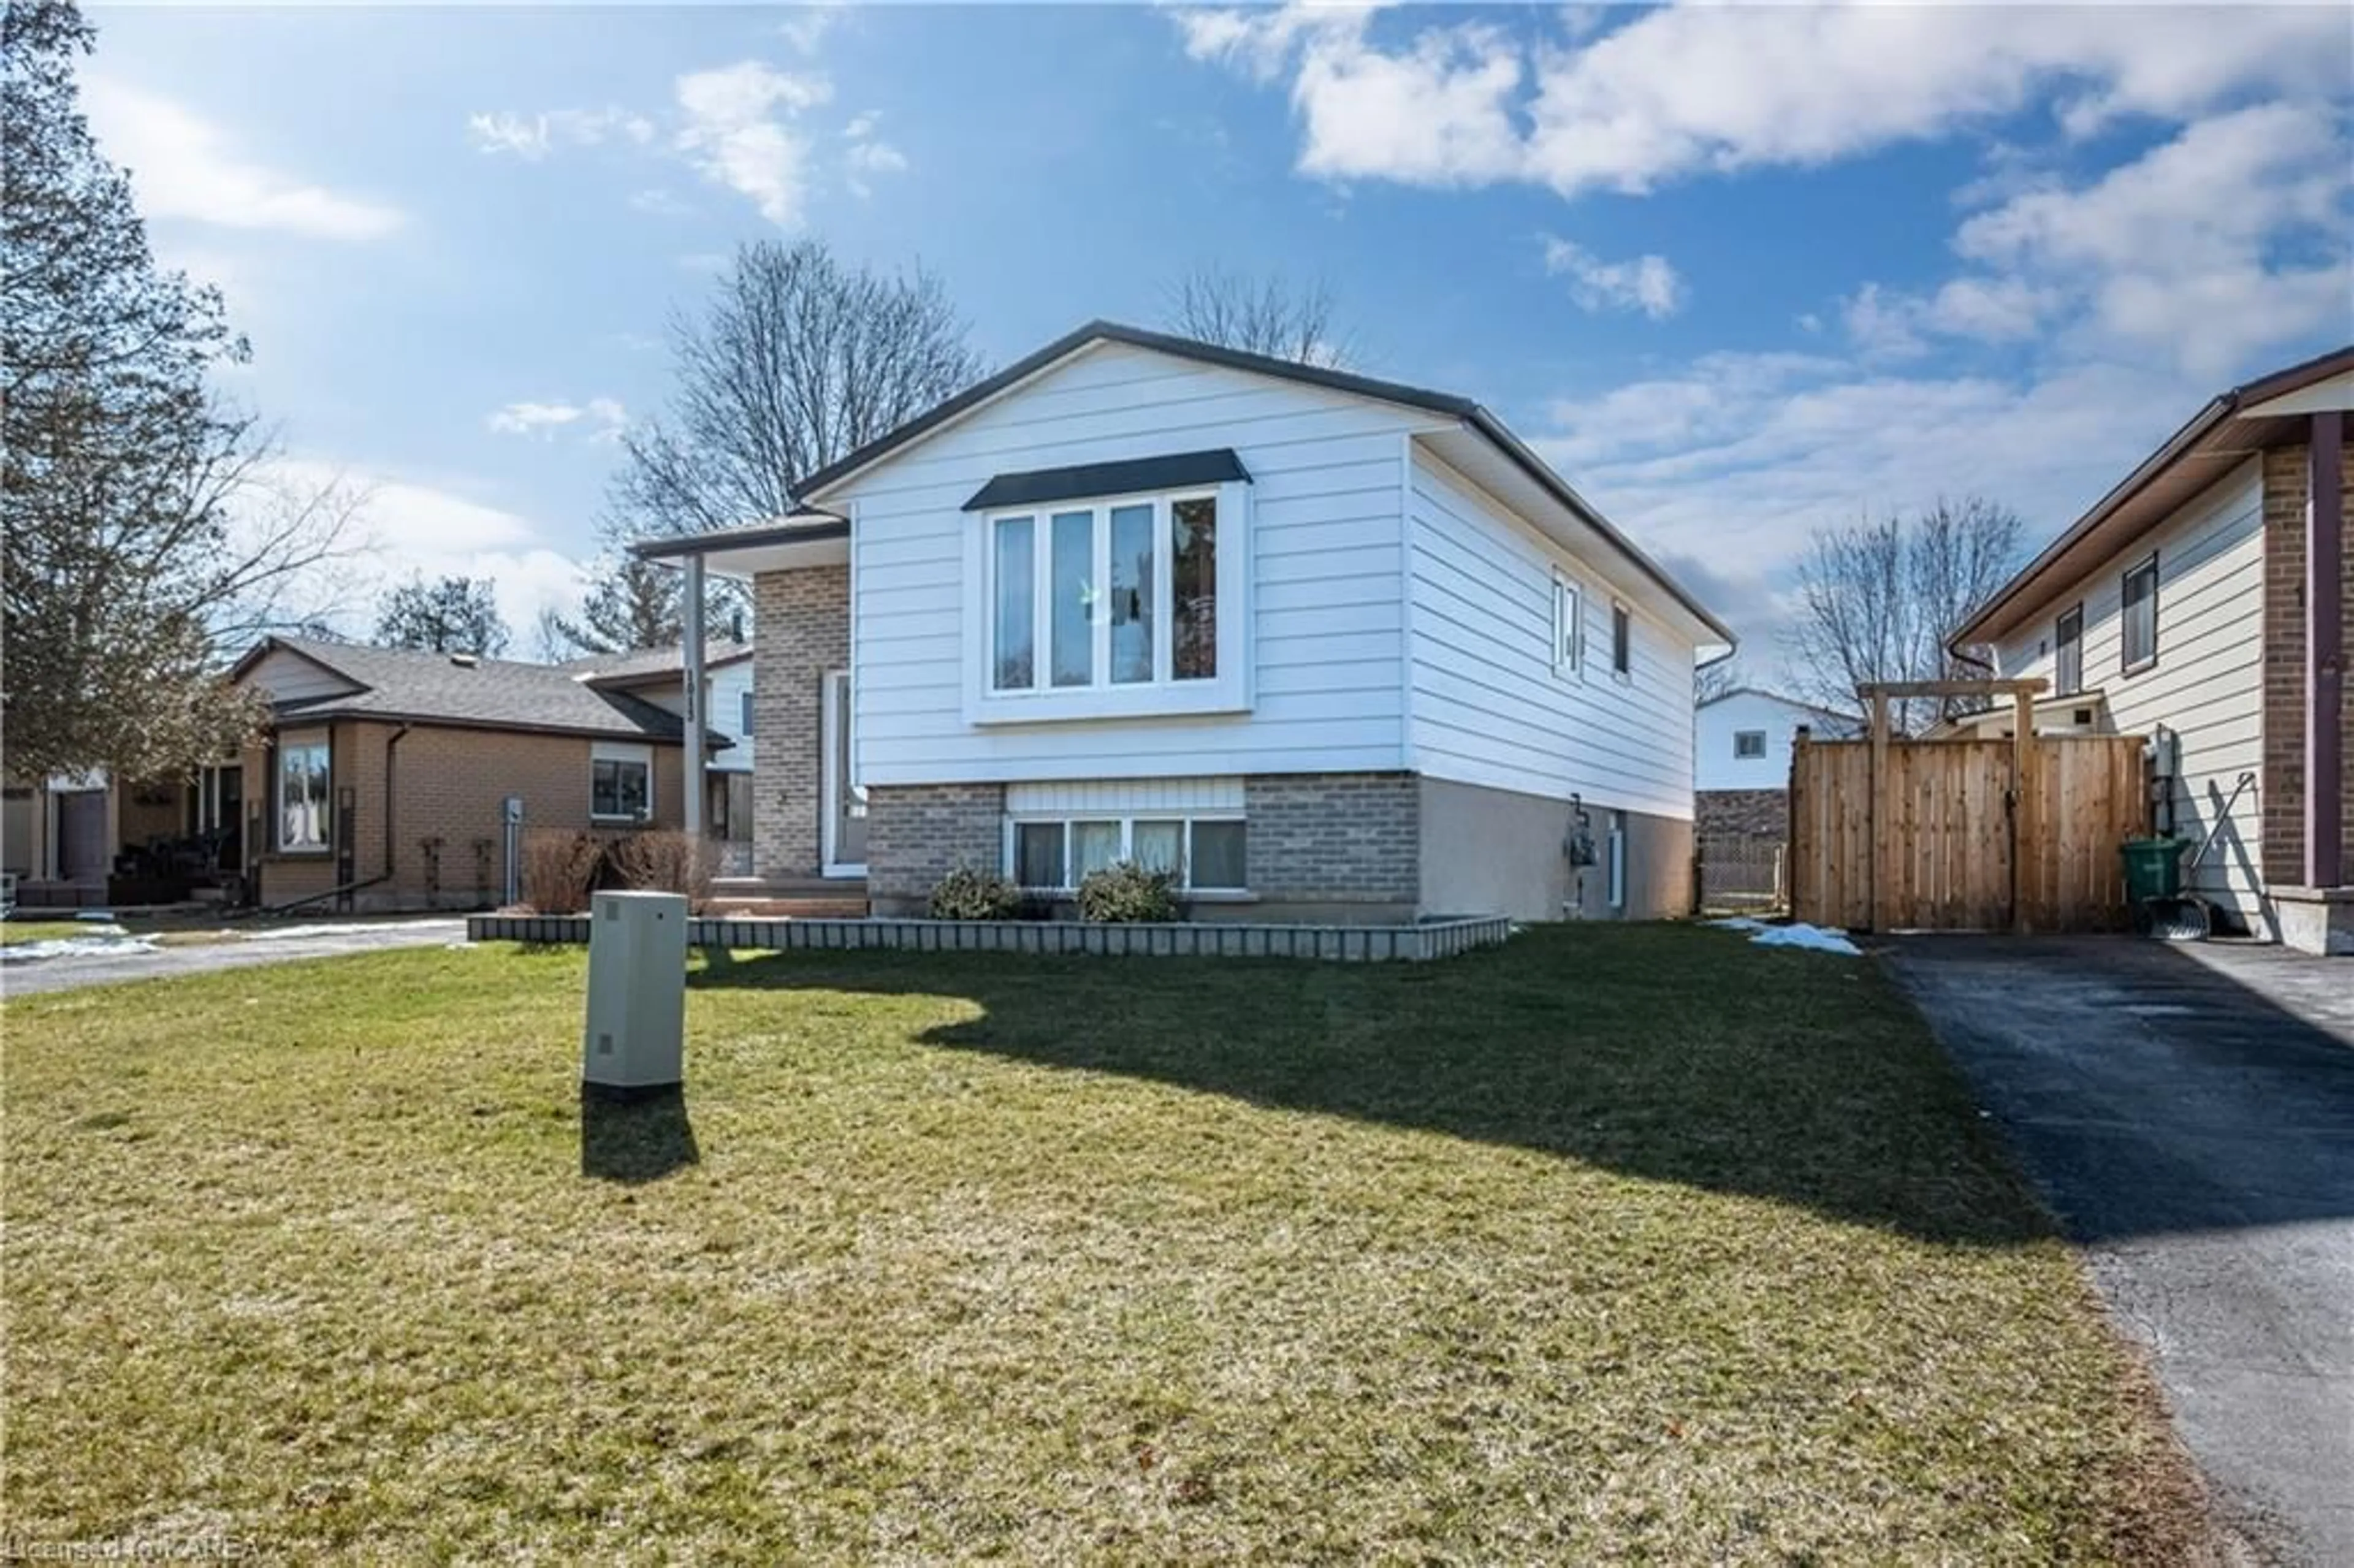 Home with brick exterior material for 1013 Pinewood Pl, Kingston Ontario K7P 1L3